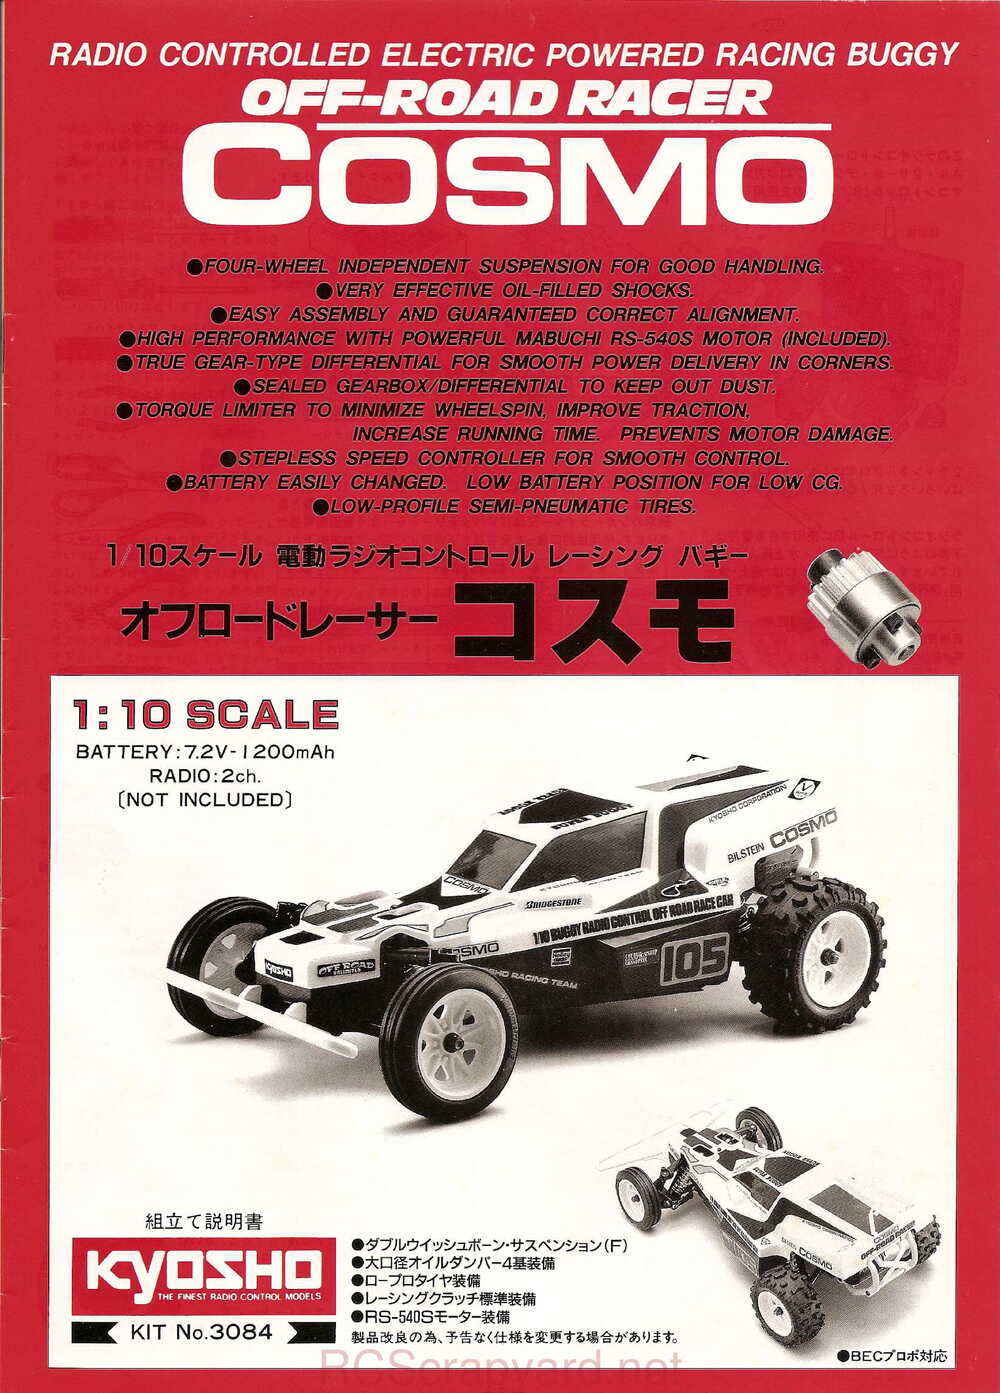 Kyosho - 3084 - Cosmo - Manual - Page 01